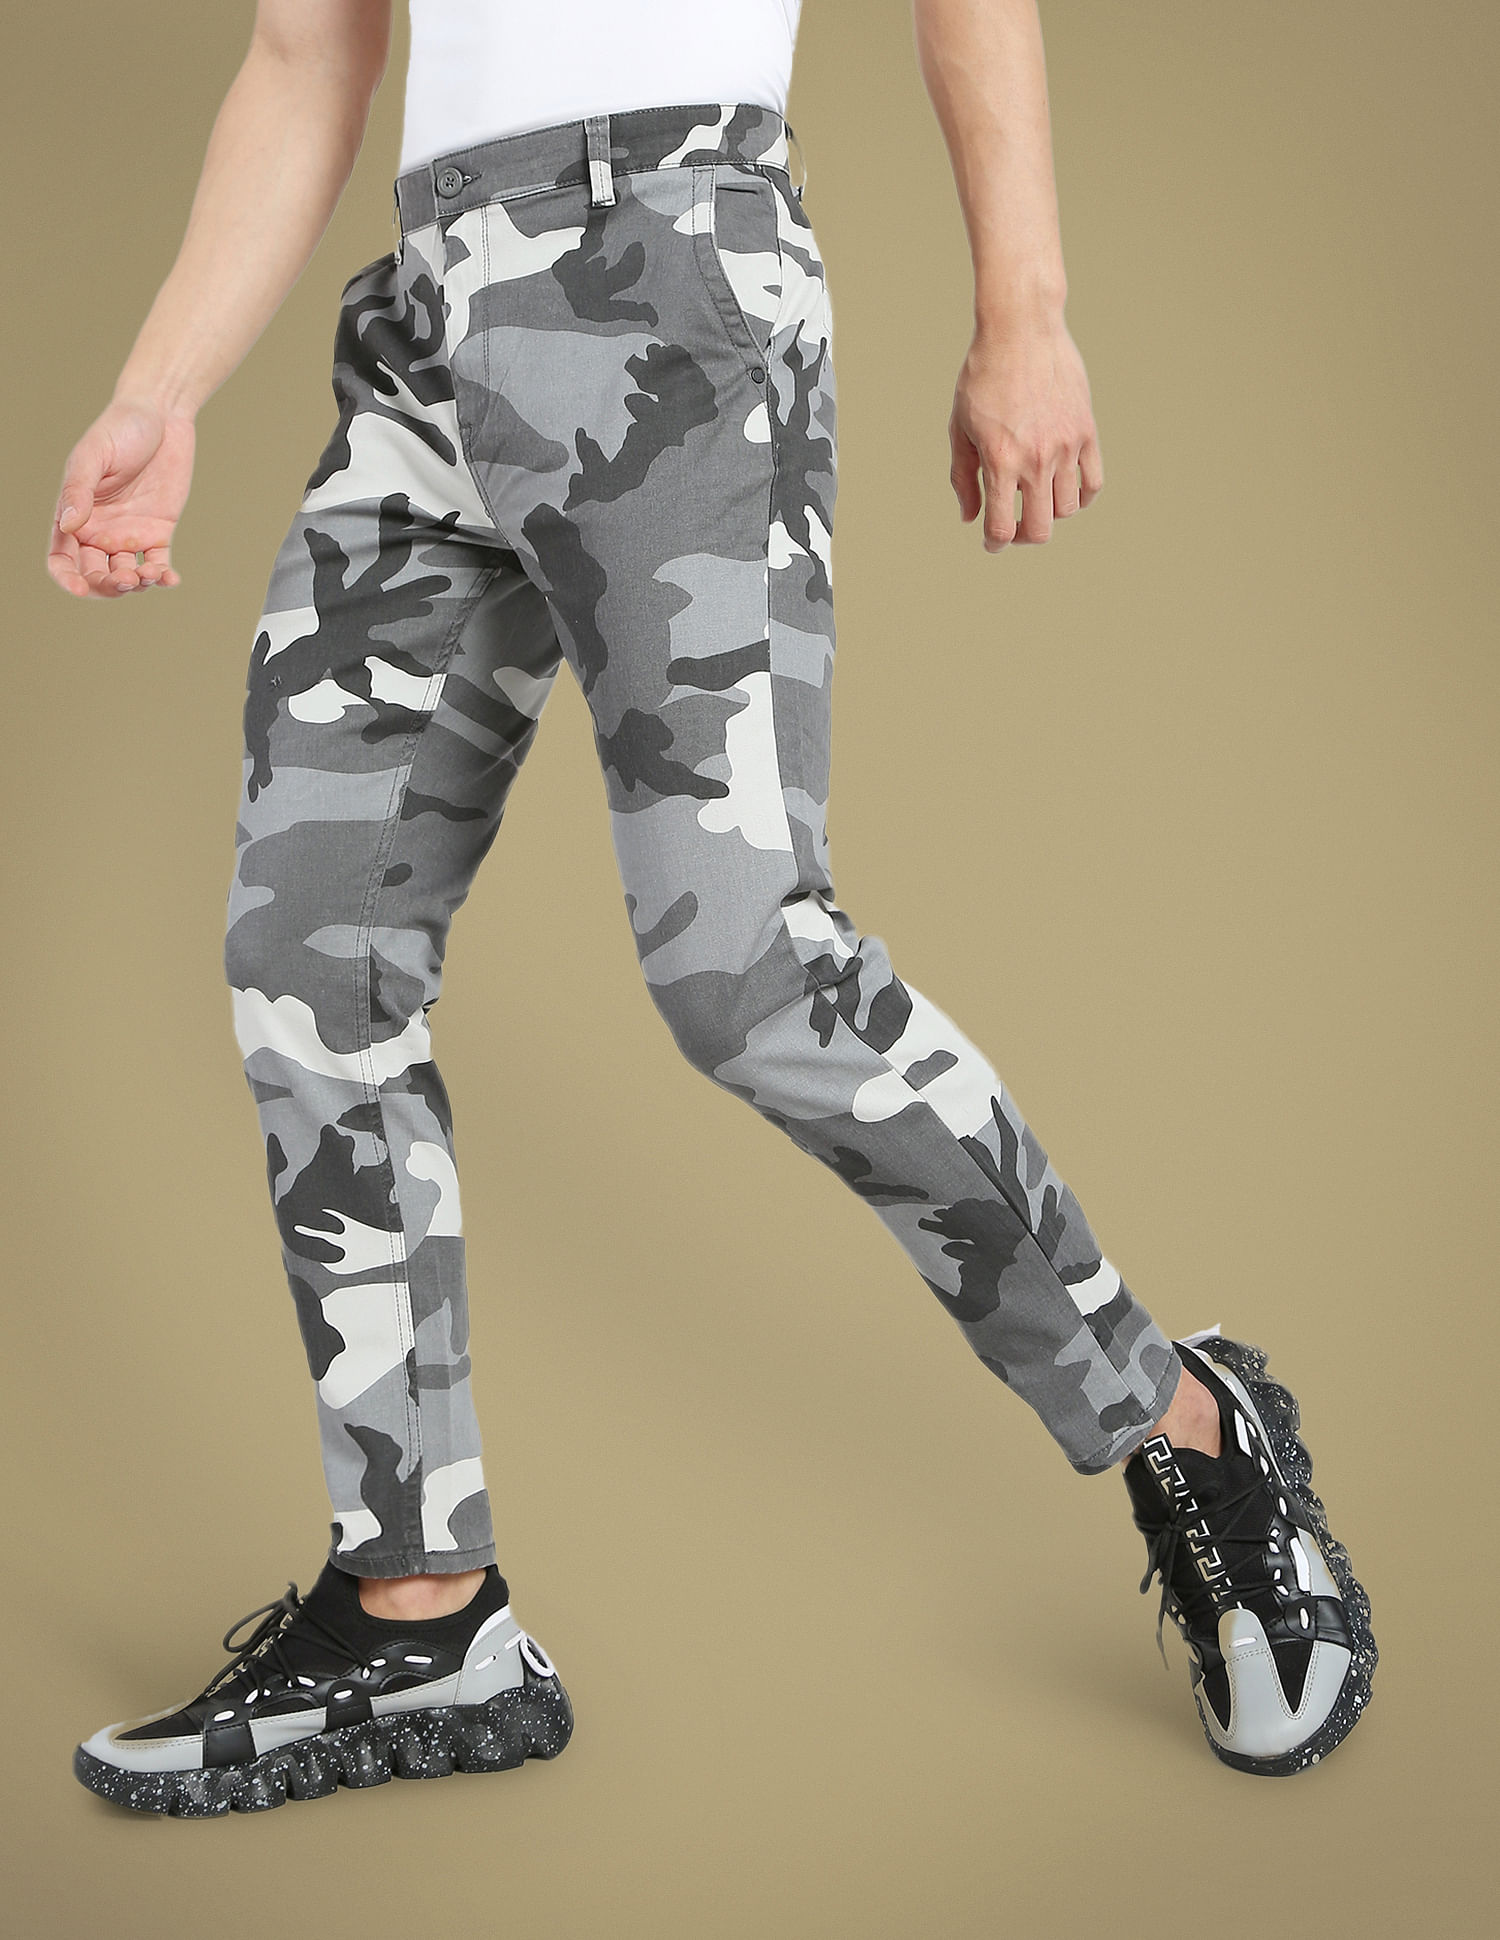 Military Camouflage Mens Cargo Pants With Multi Pocket Design Plus Size 42  For Autumn/Winter Work Army Trousers Mens From Happy_snow, $38.58 |  DHgate.Com